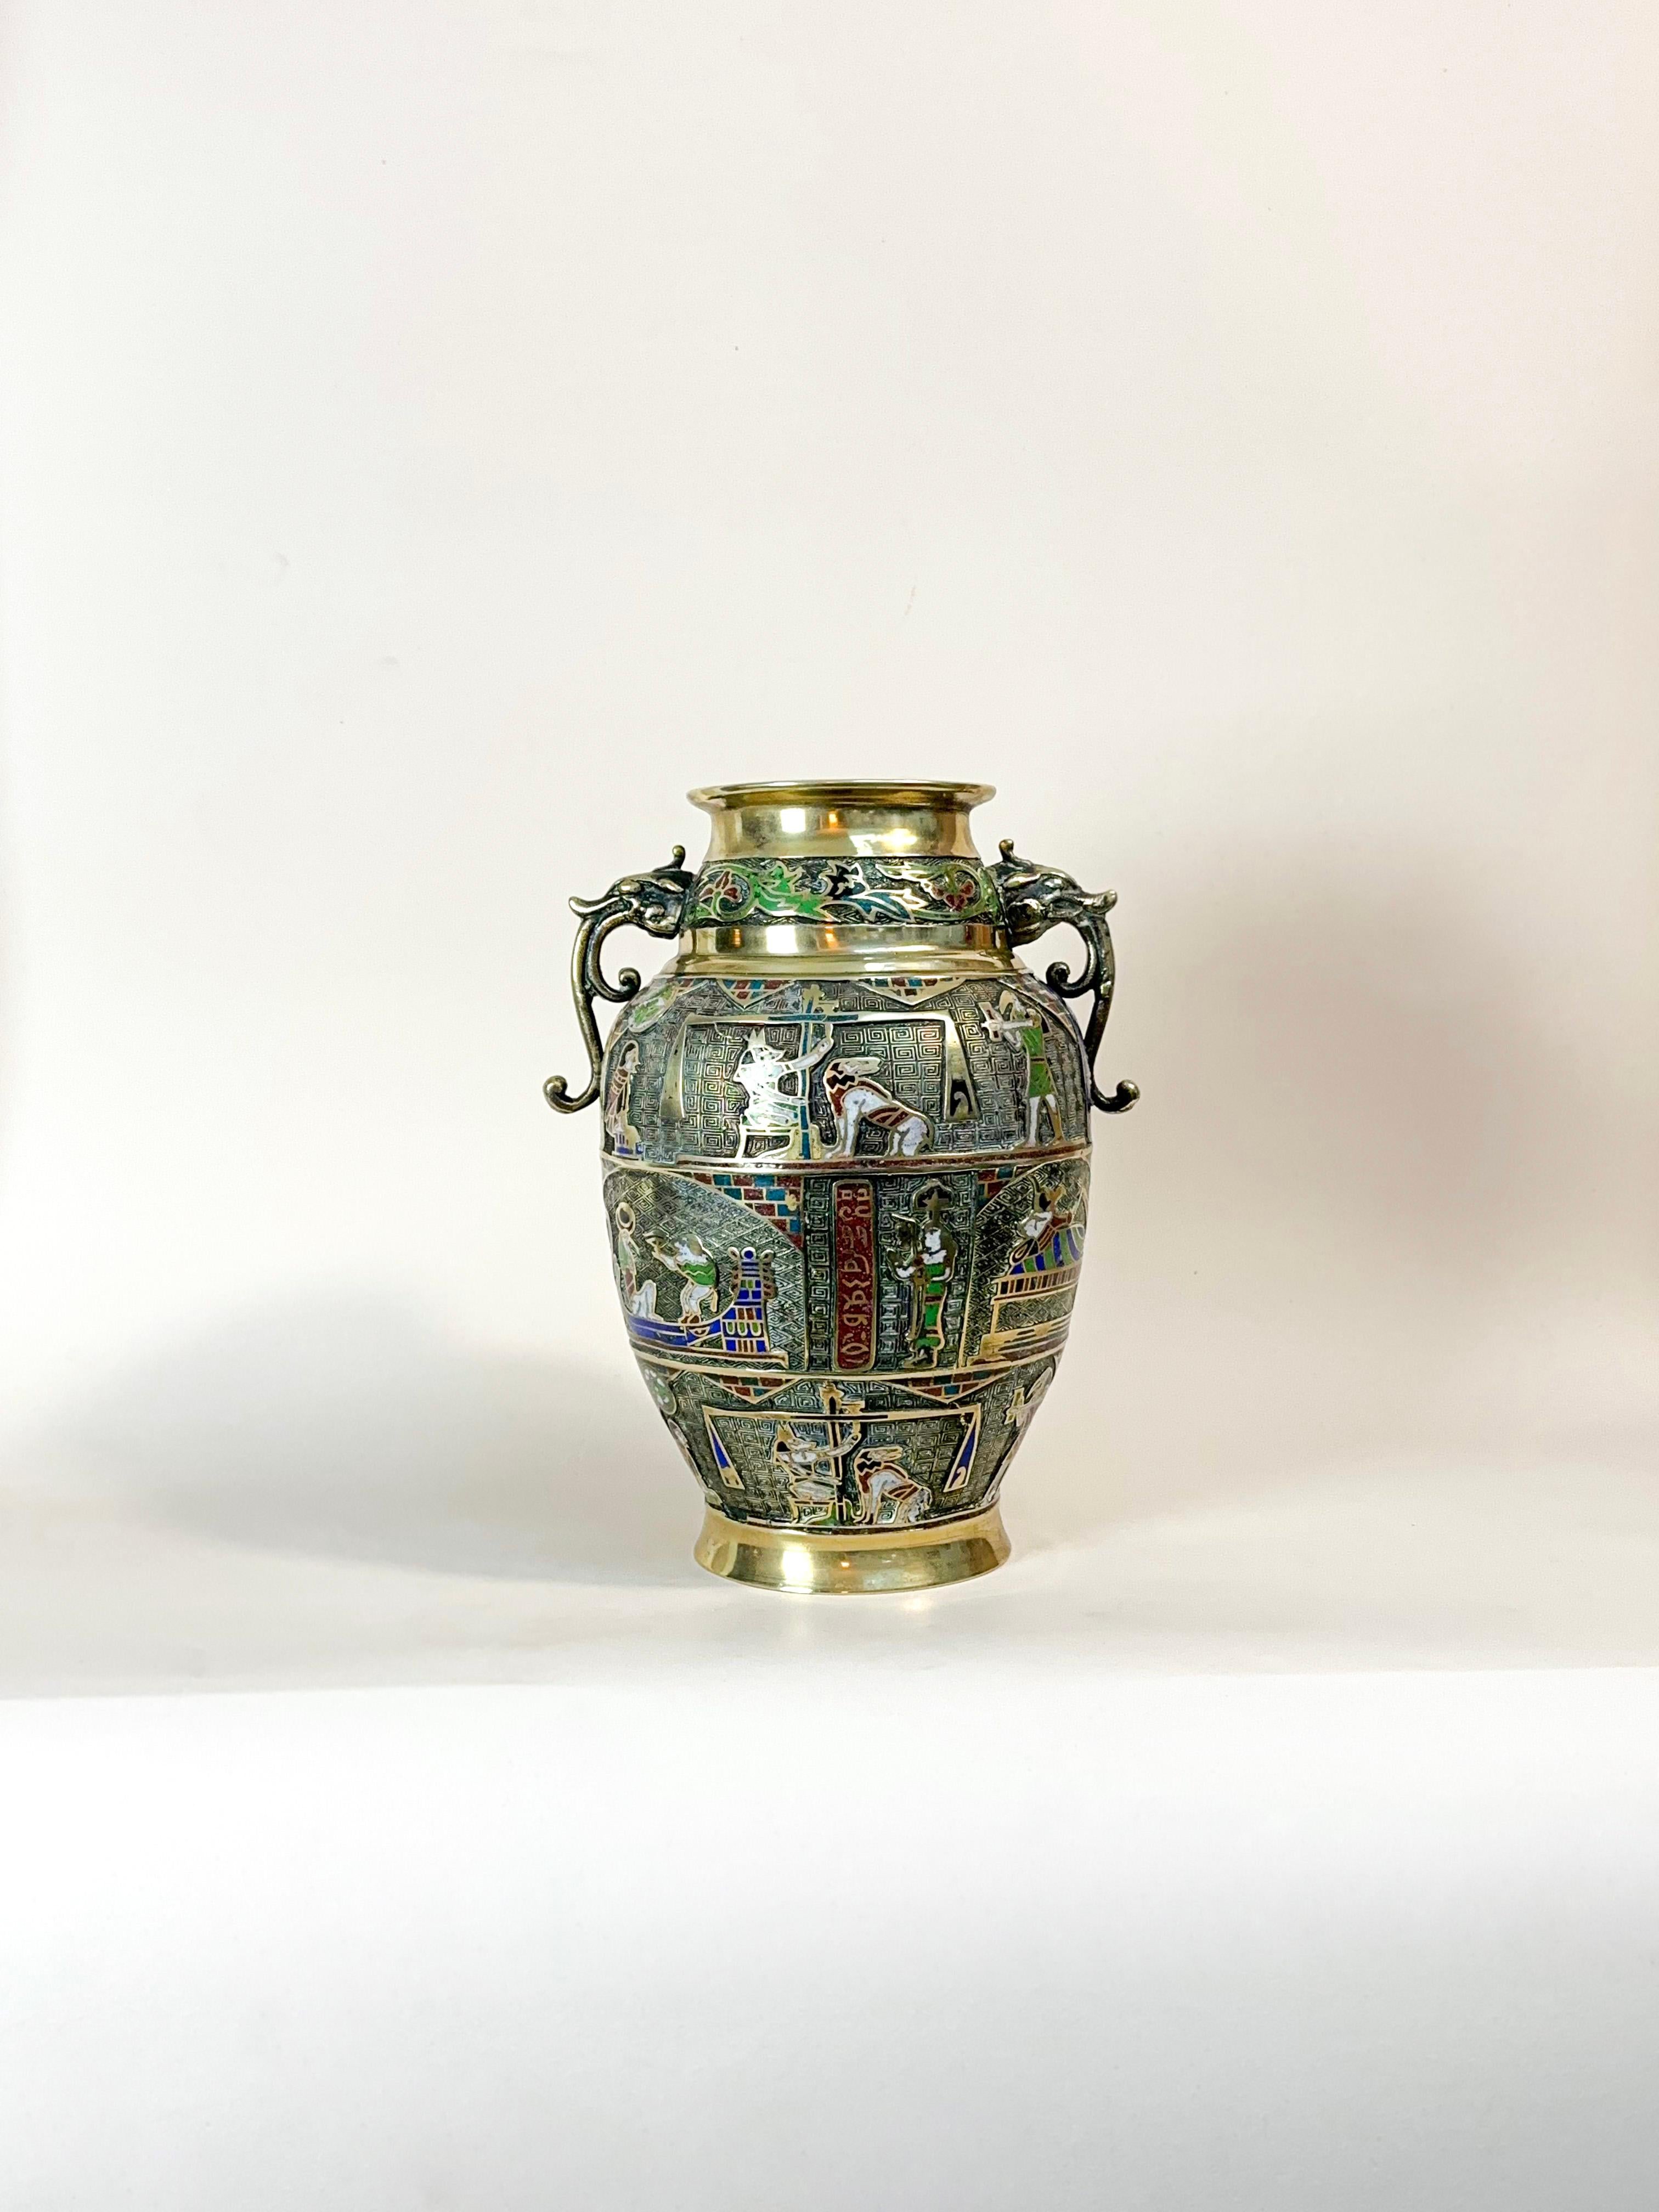 Large Art Deco era champlevé vase.

Brass urn-shaped vase from the 1920s, adorned with Egyptian motifs and scenes using the champlevé technique, featuring stylised dragon handles and a vibrant enamel finish.

Key Points:

Intricate champlevé enamel